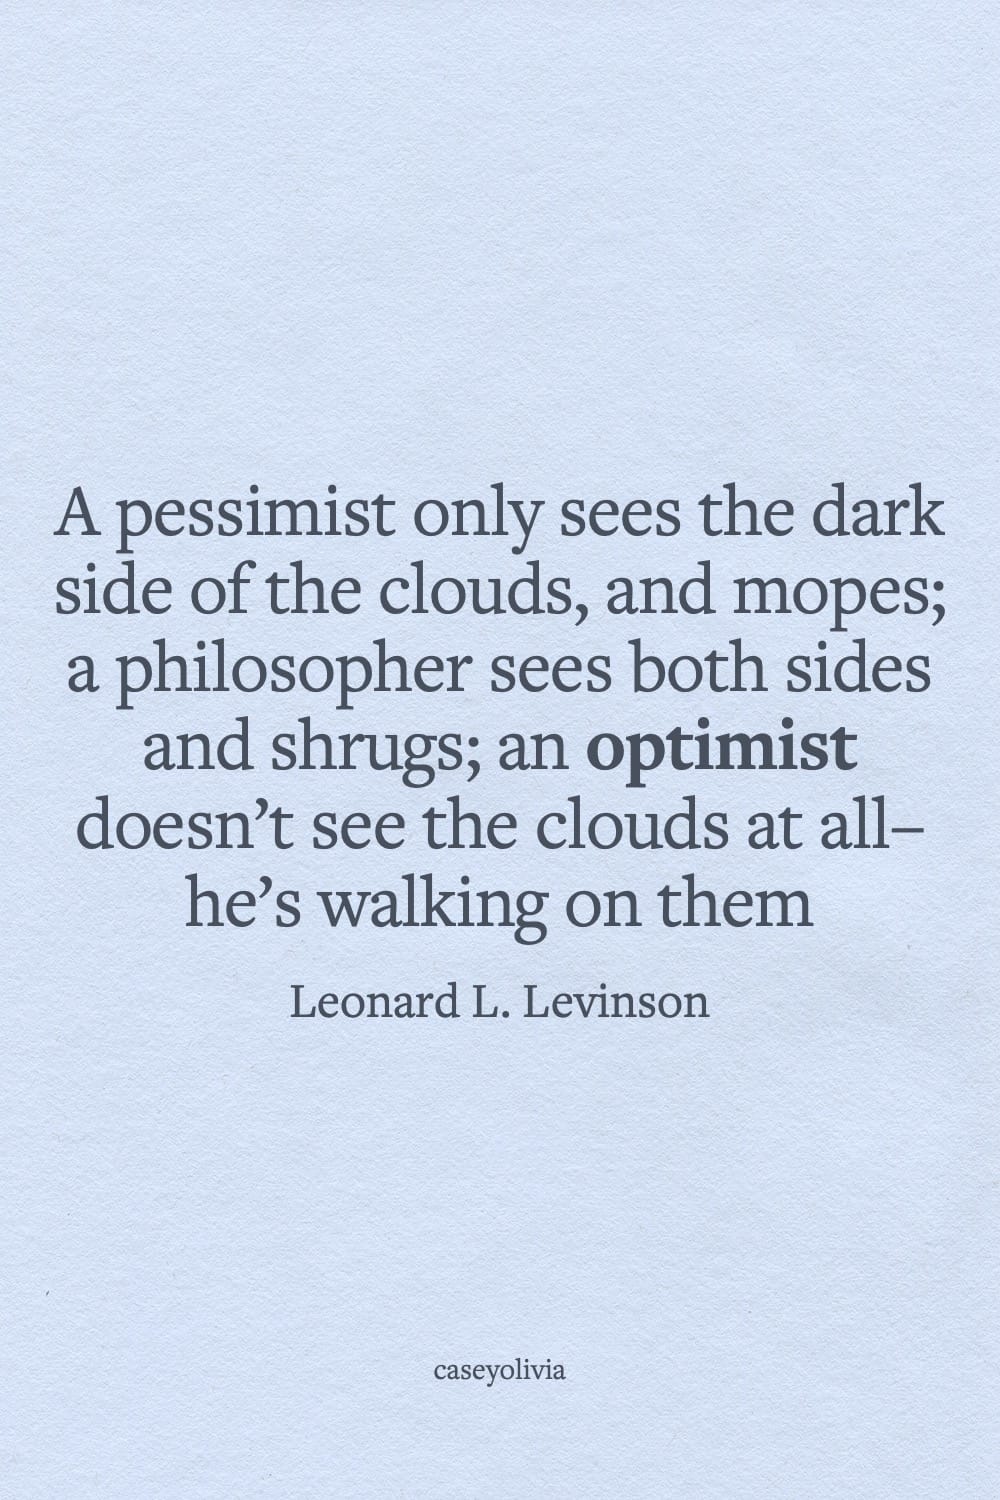 leonard l levinson optimism to see the good in the future